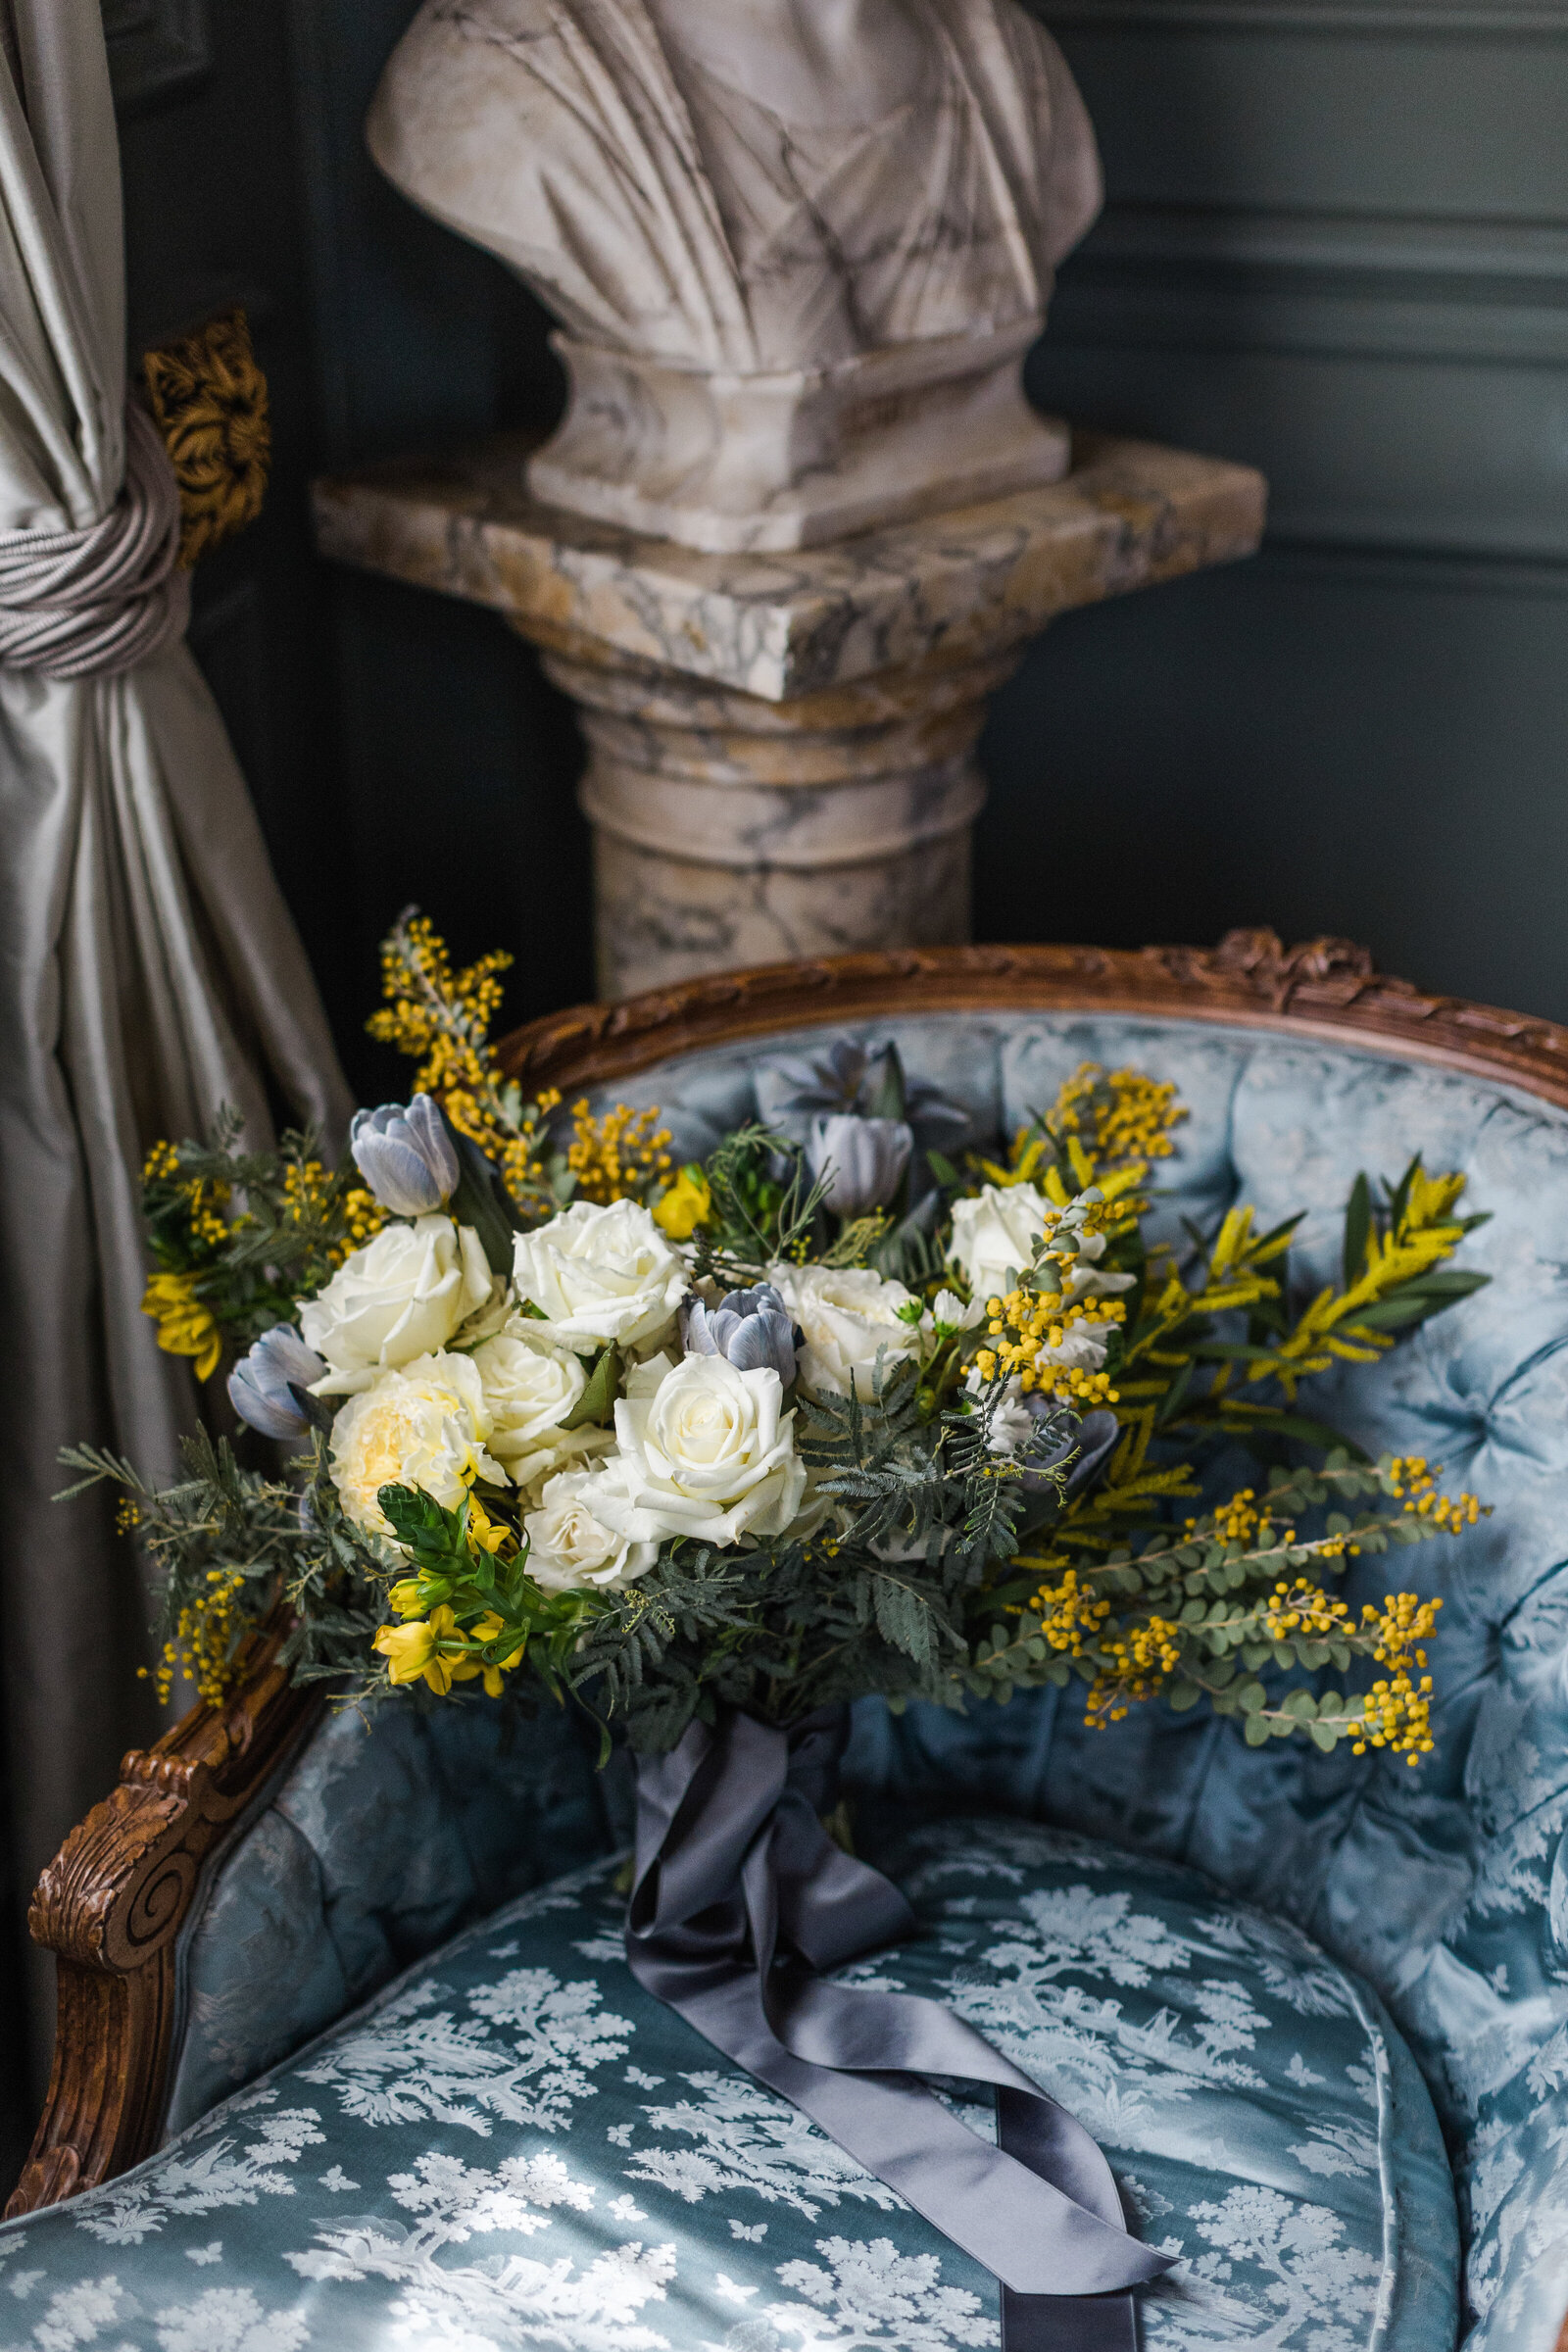 A detail shot of a wedding bouquet white and yellow flowers with blue ribbons flowing off the end. The bouquet is resting on a fancy blue chair with white floral patterns with a marble bust seen in the background.